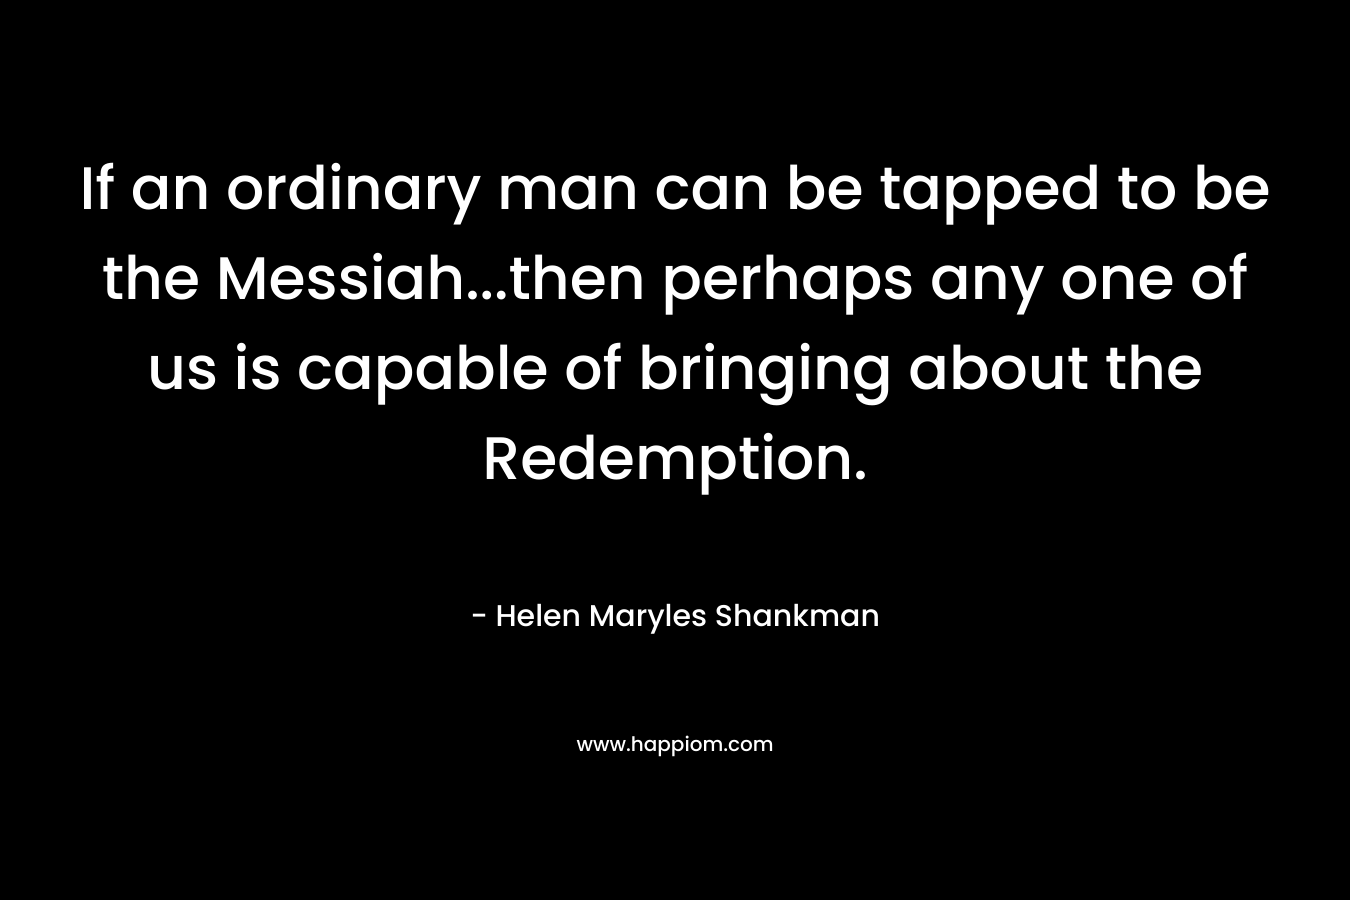 If an ordinary man can be tapped to be the Messiah…then perhaps any one of us is capable of bringing about the Redemption. – Helen Maryles Shankman